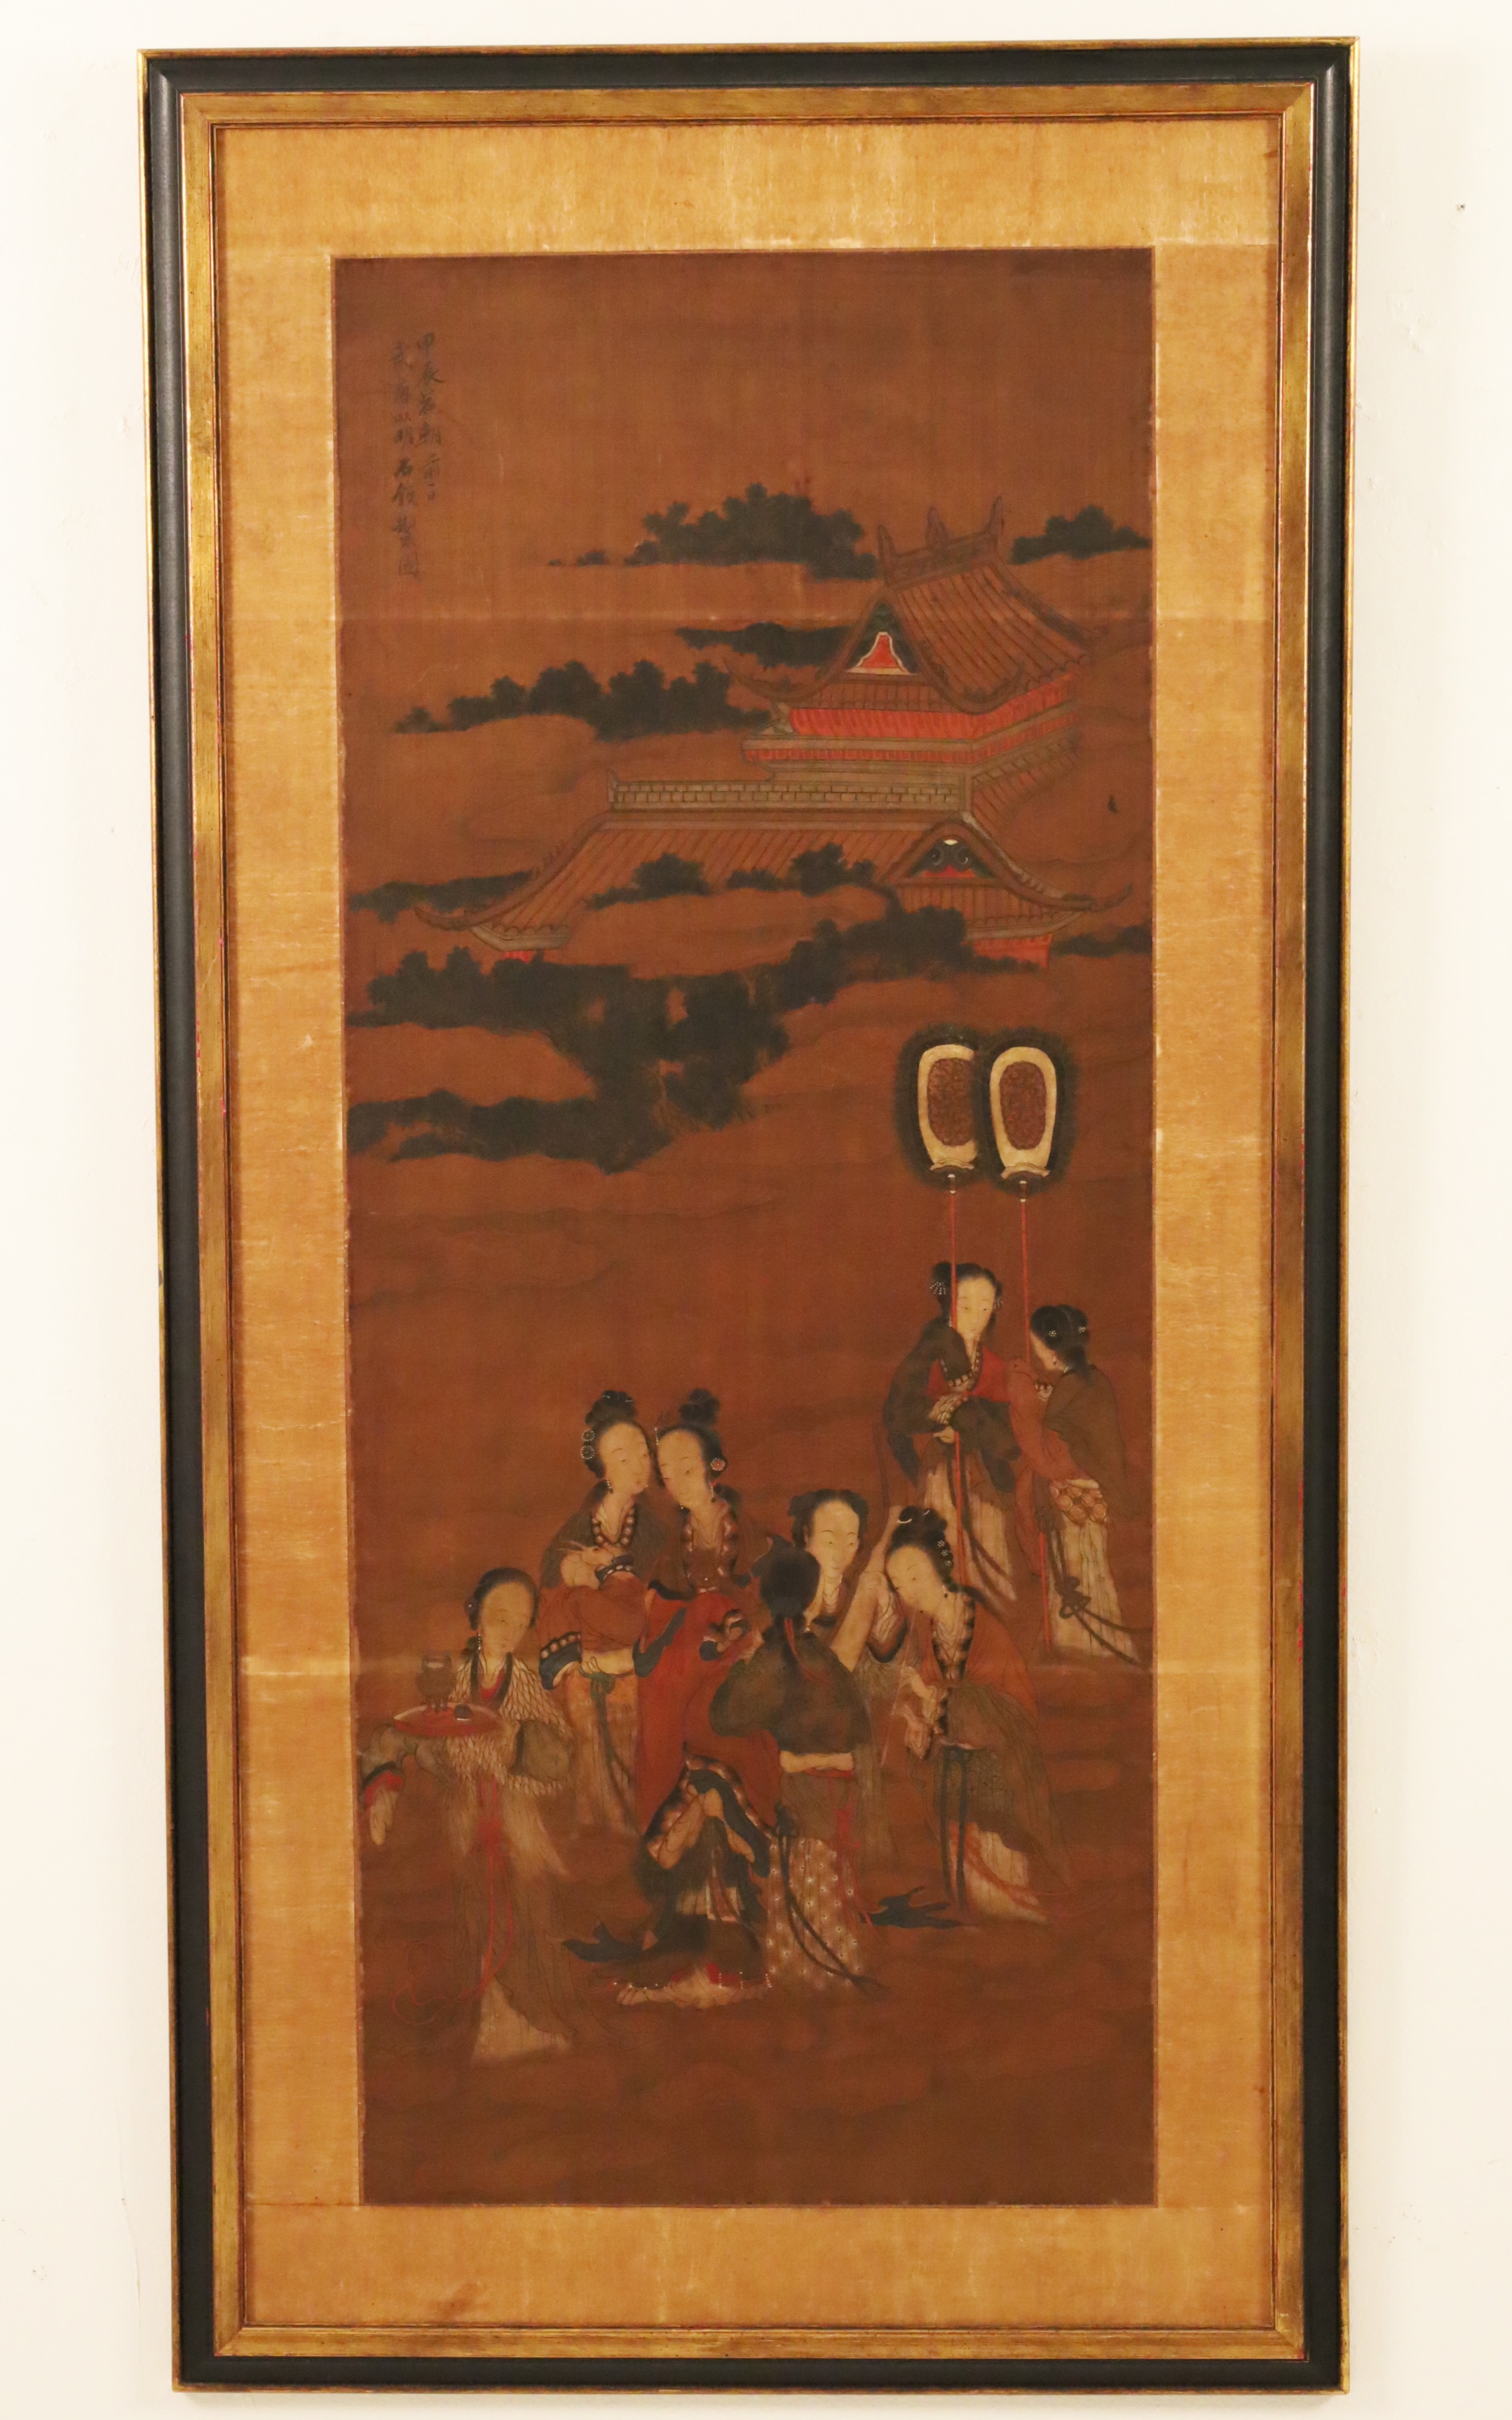 QING DYNASTY PAINTING ON PAPER 2f8d7b